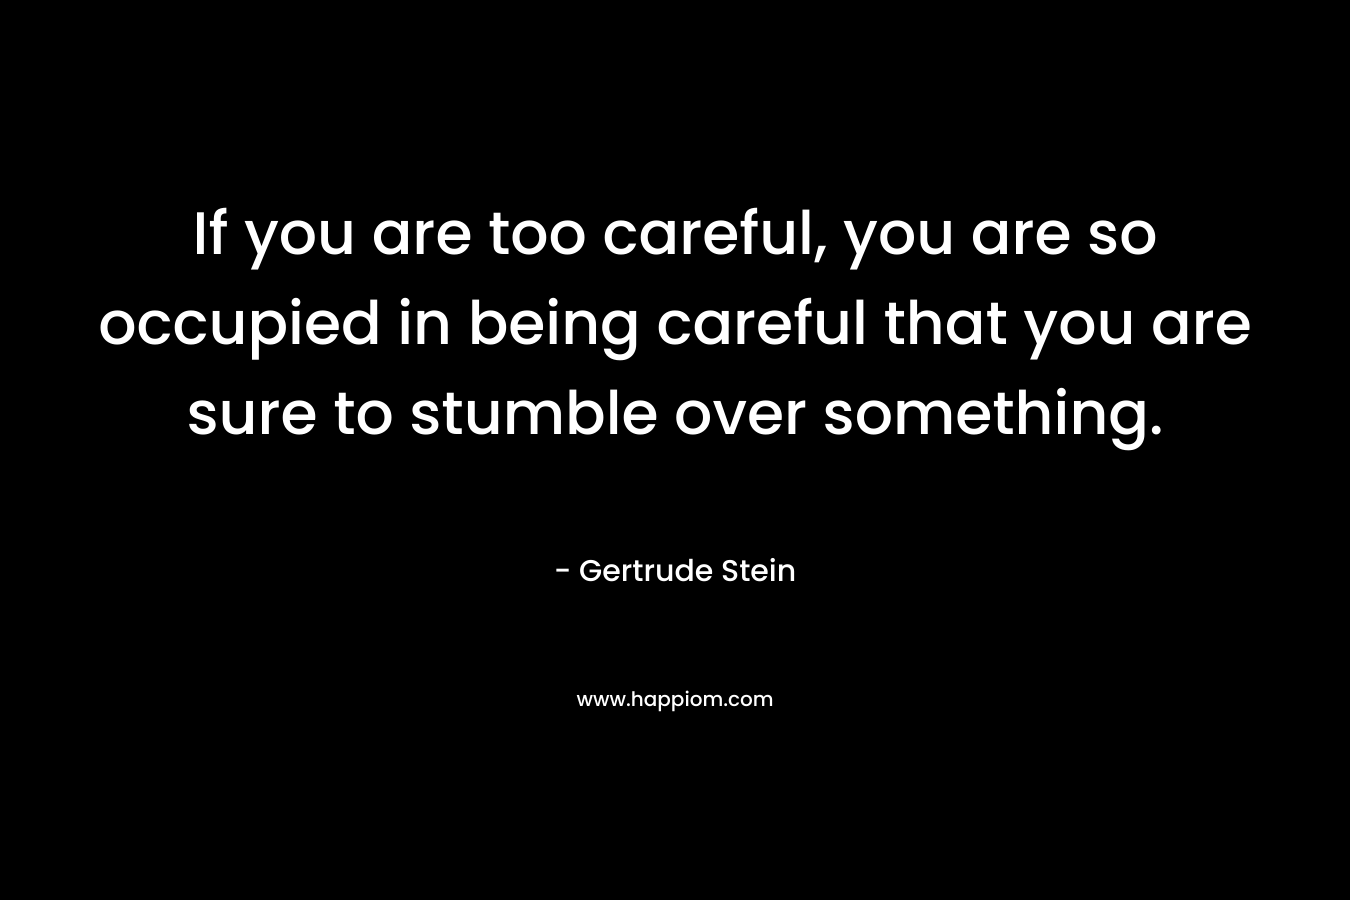 If you are too careful, you are so occupied in being careful that you are sure to stumble over something.